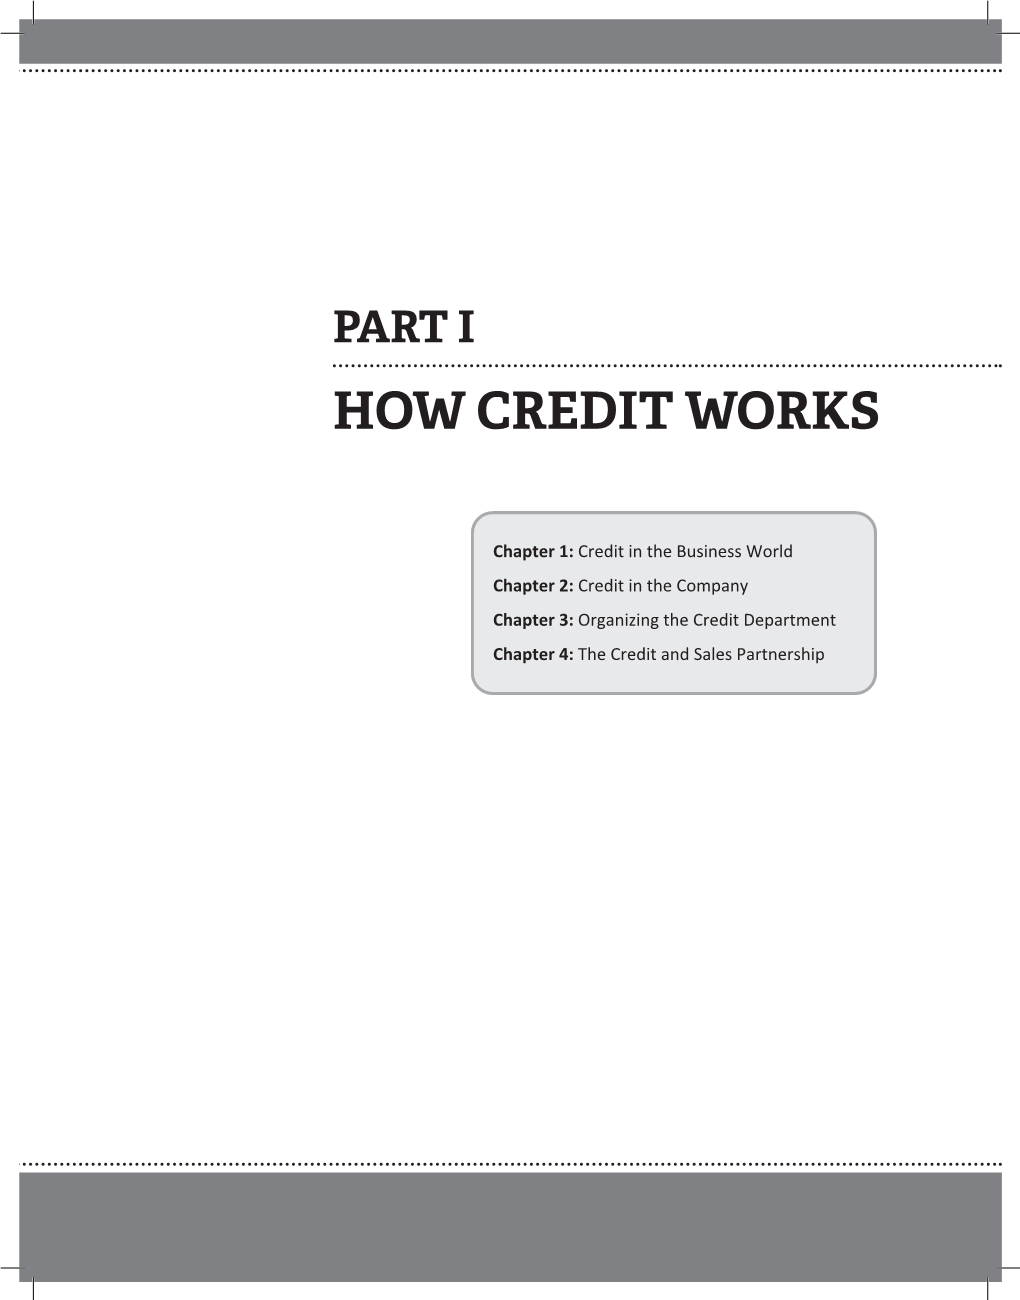 How Credit Works